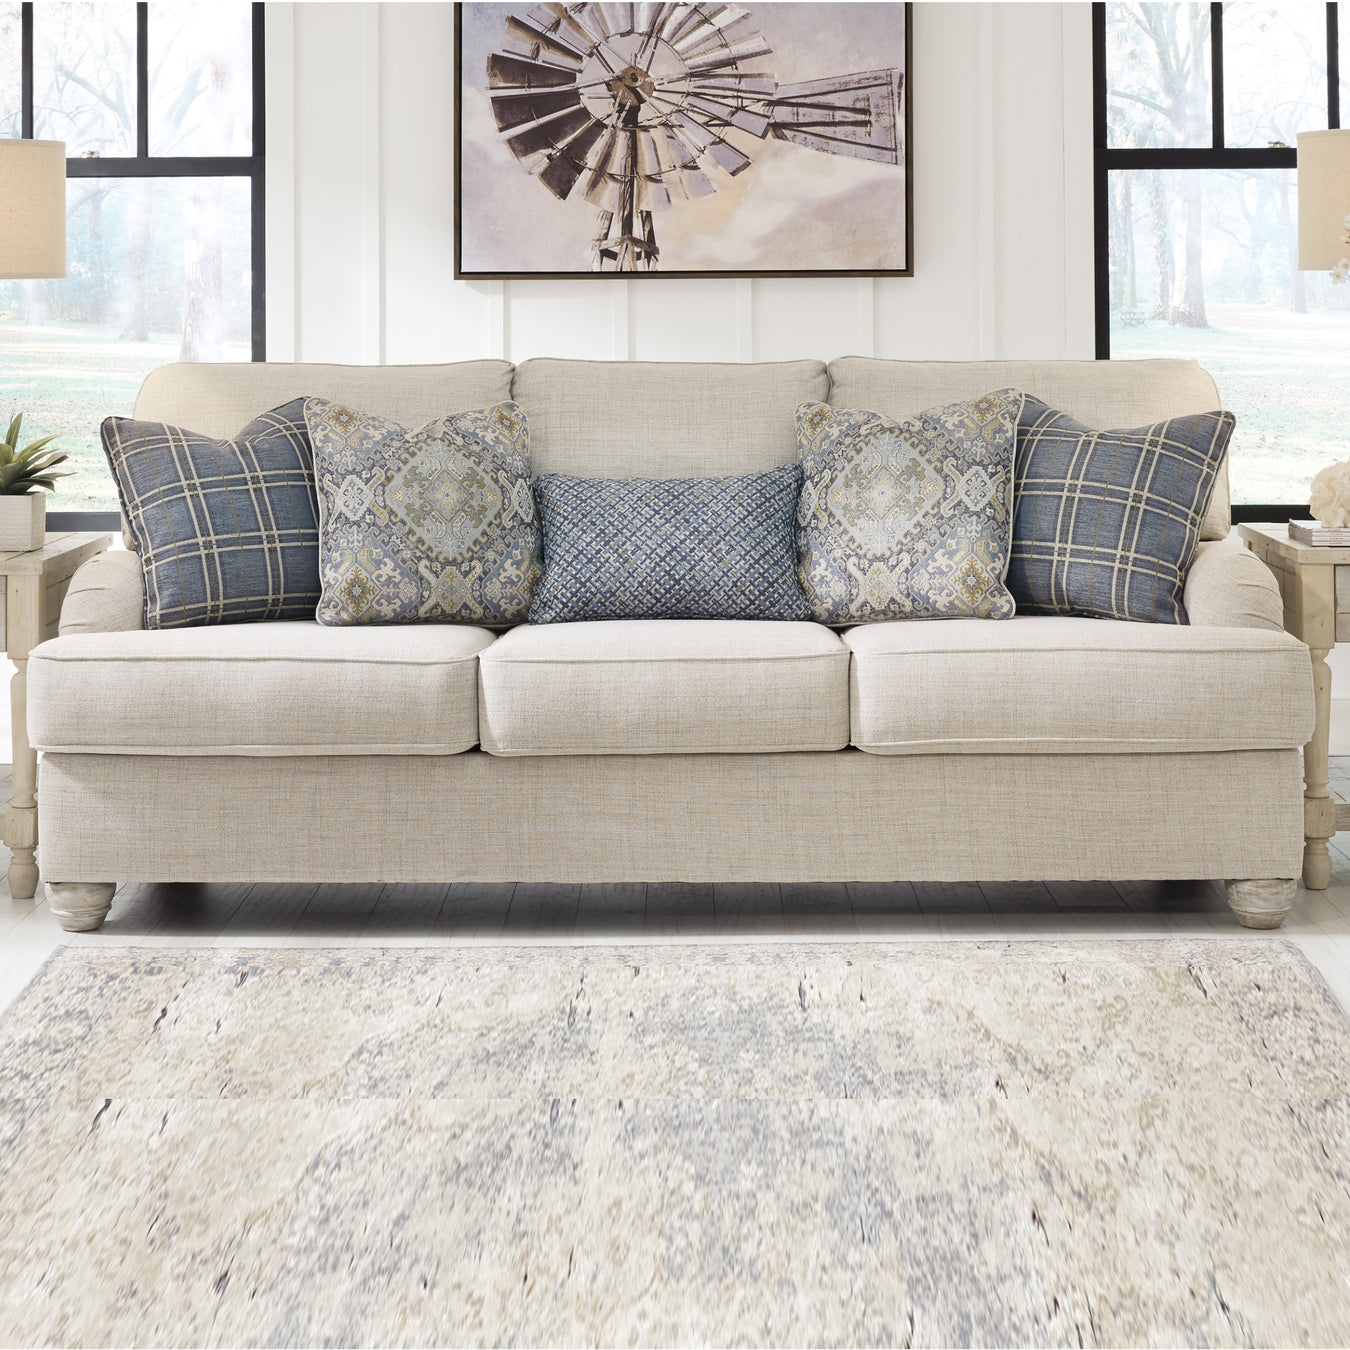 Shop Sofas at JR Furniture Store in Fayetteville, NC 28311